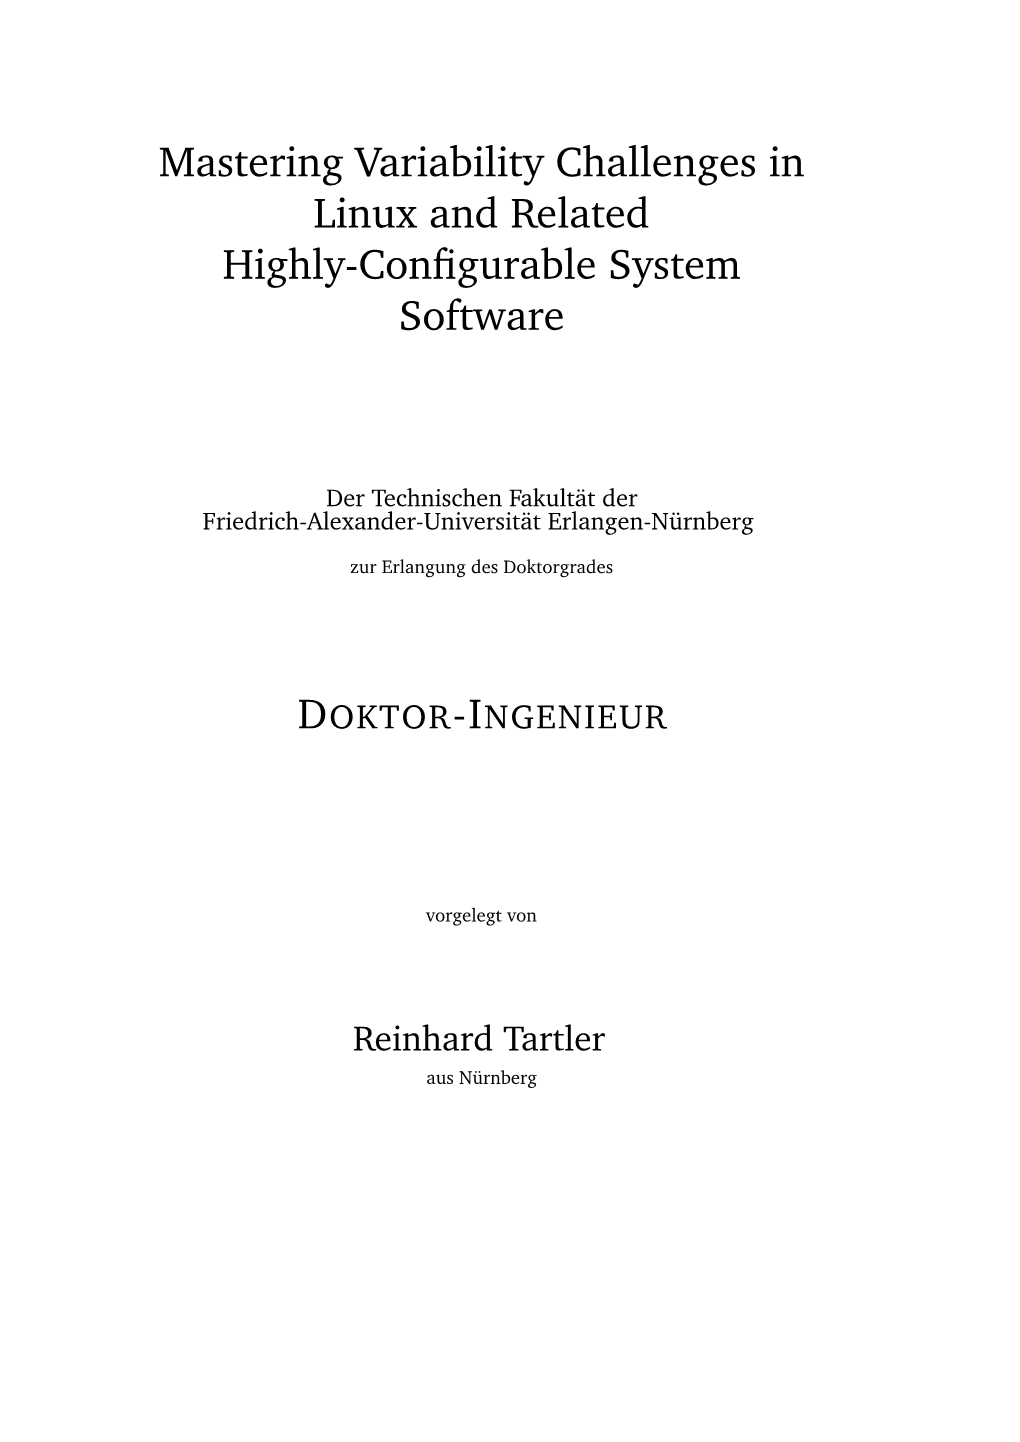 Mastering Variability Challenges in Linux and Related Highly-Conﬁgurable System Software